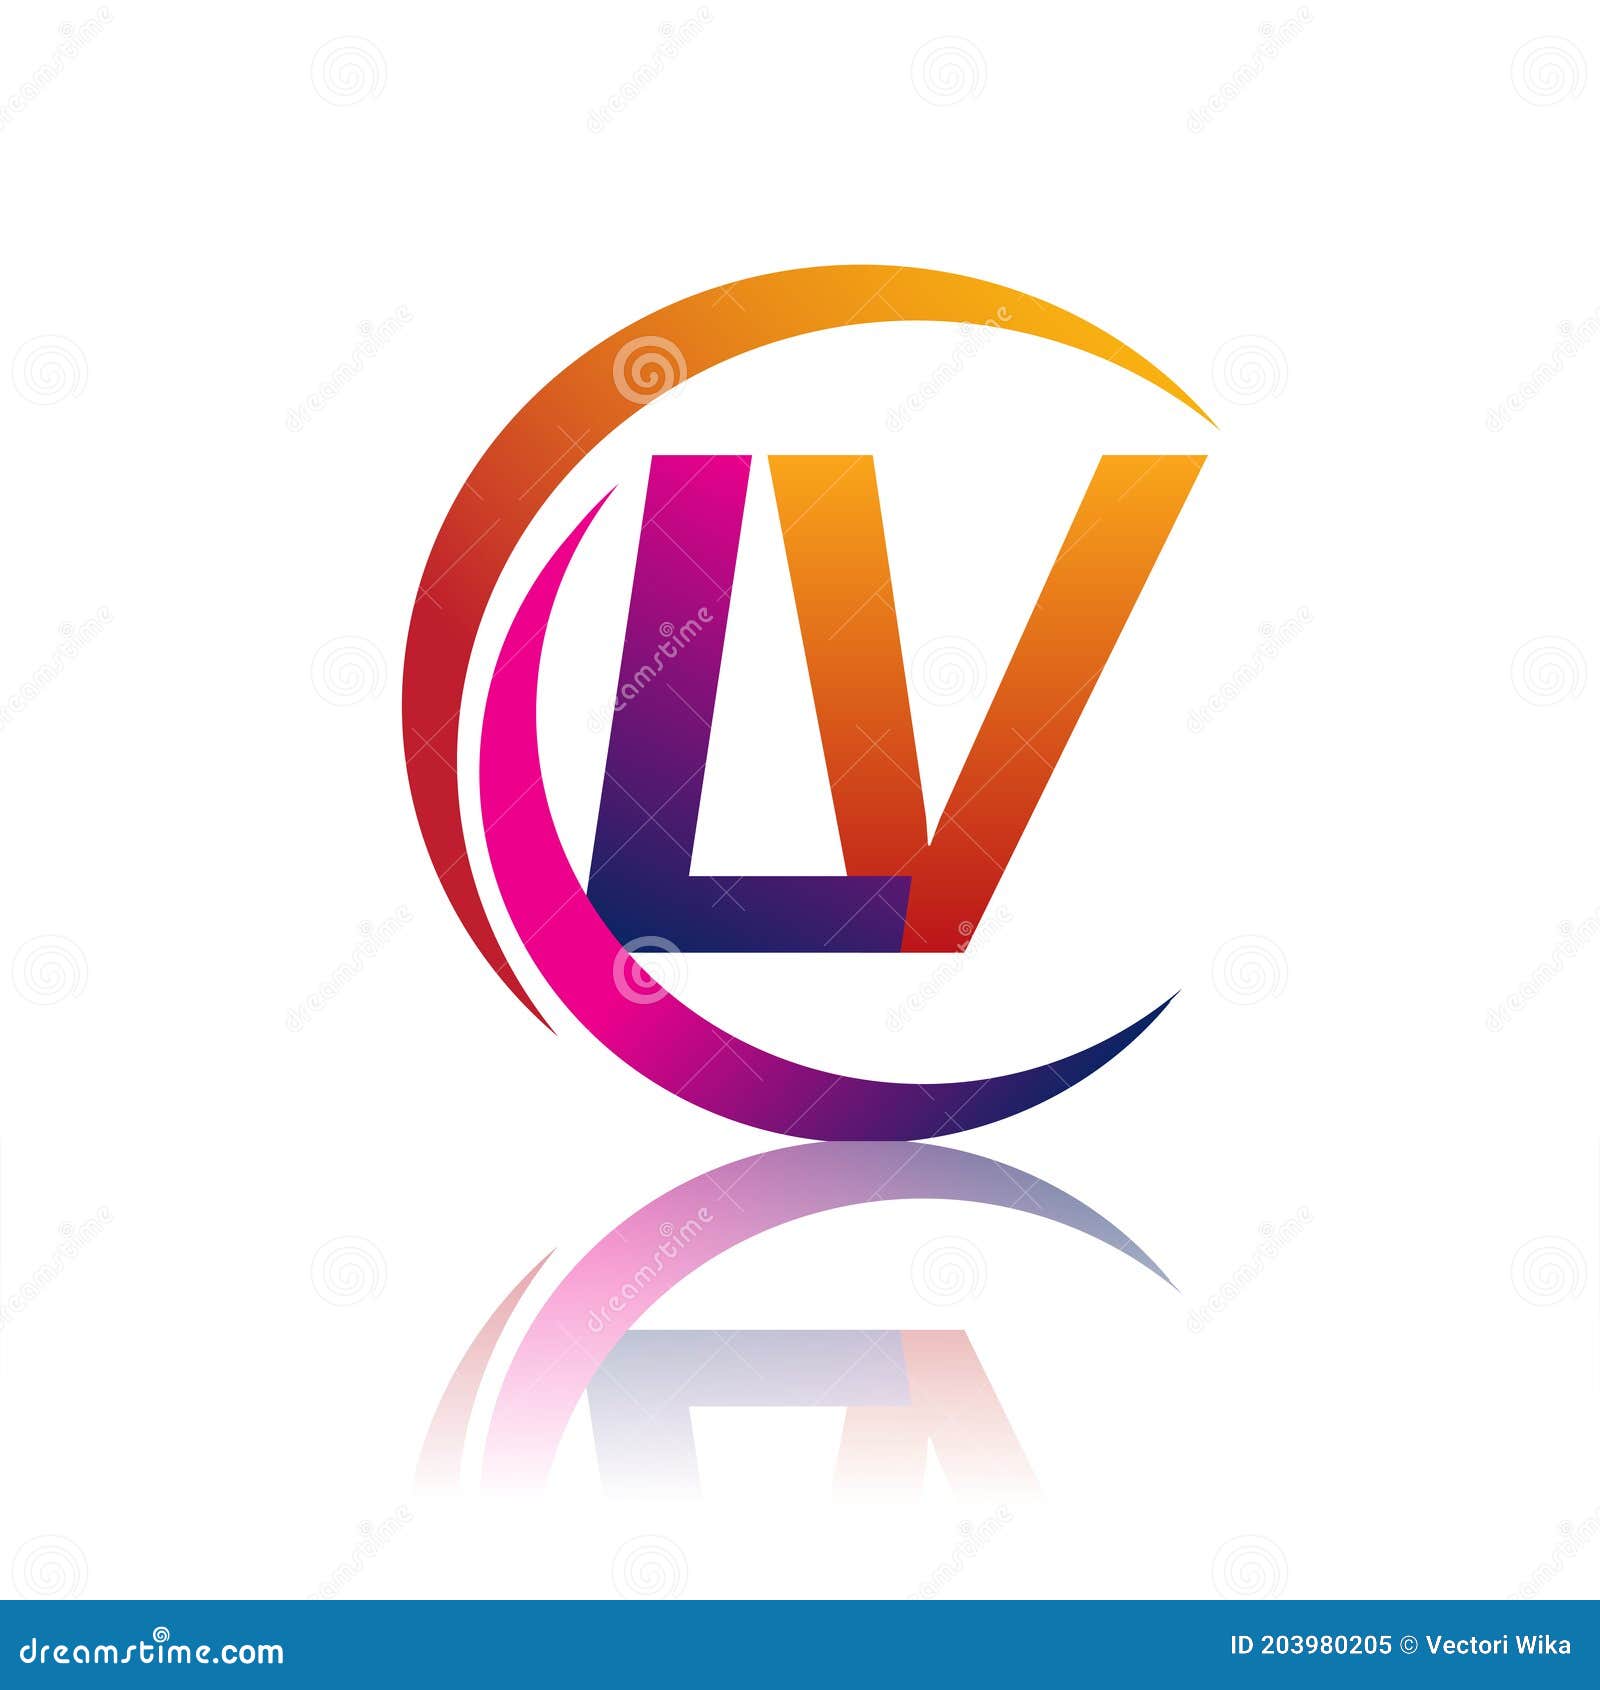 Initial Letter LV Logotype Company Name Orange and Magenta Color